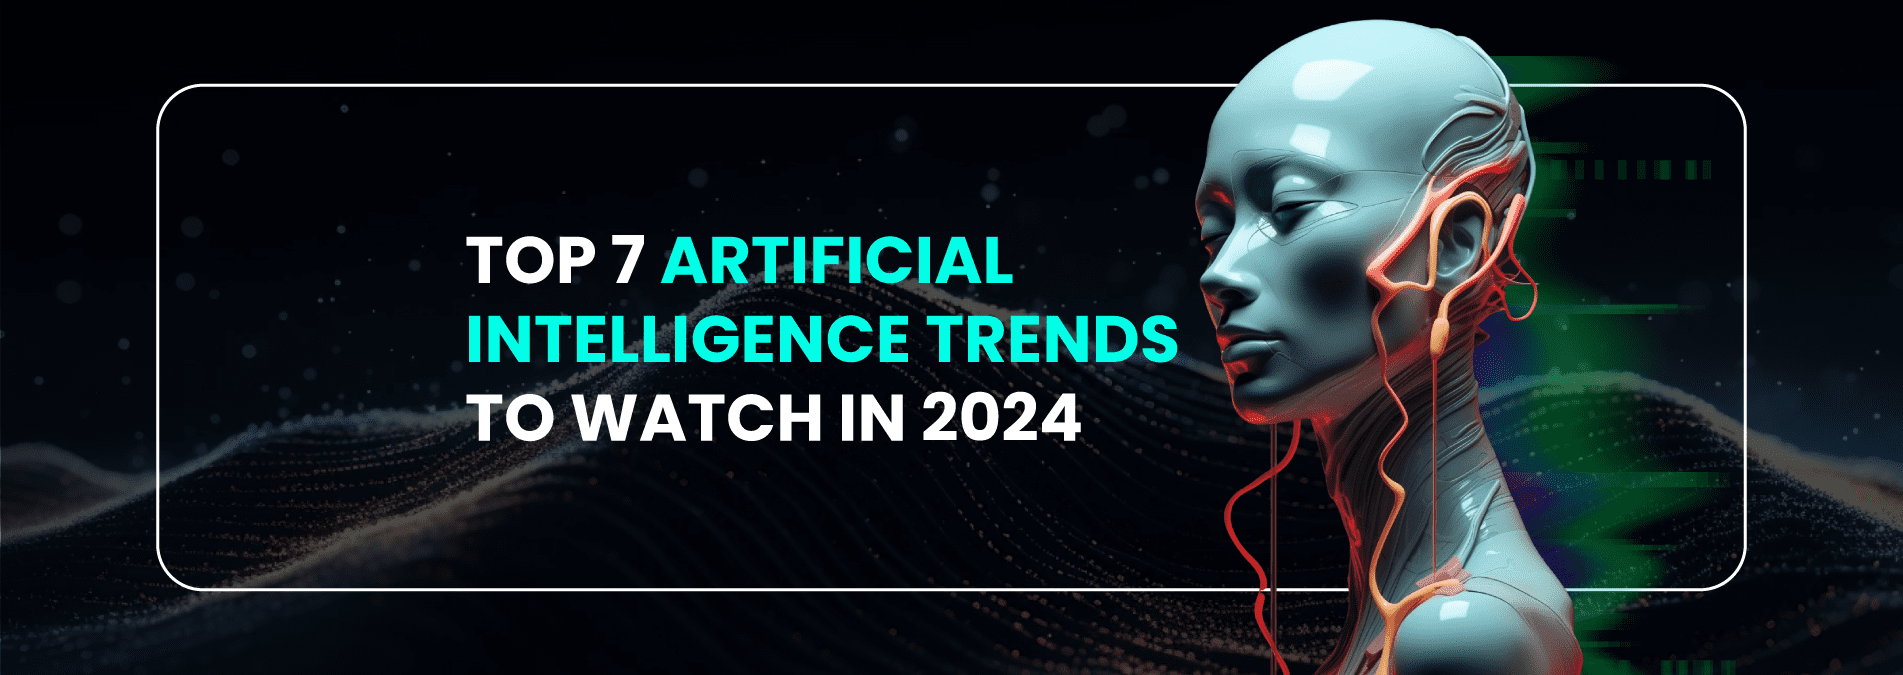 Top 7 Artificial Intelligence trends to watch in 2024 - Internet Soft